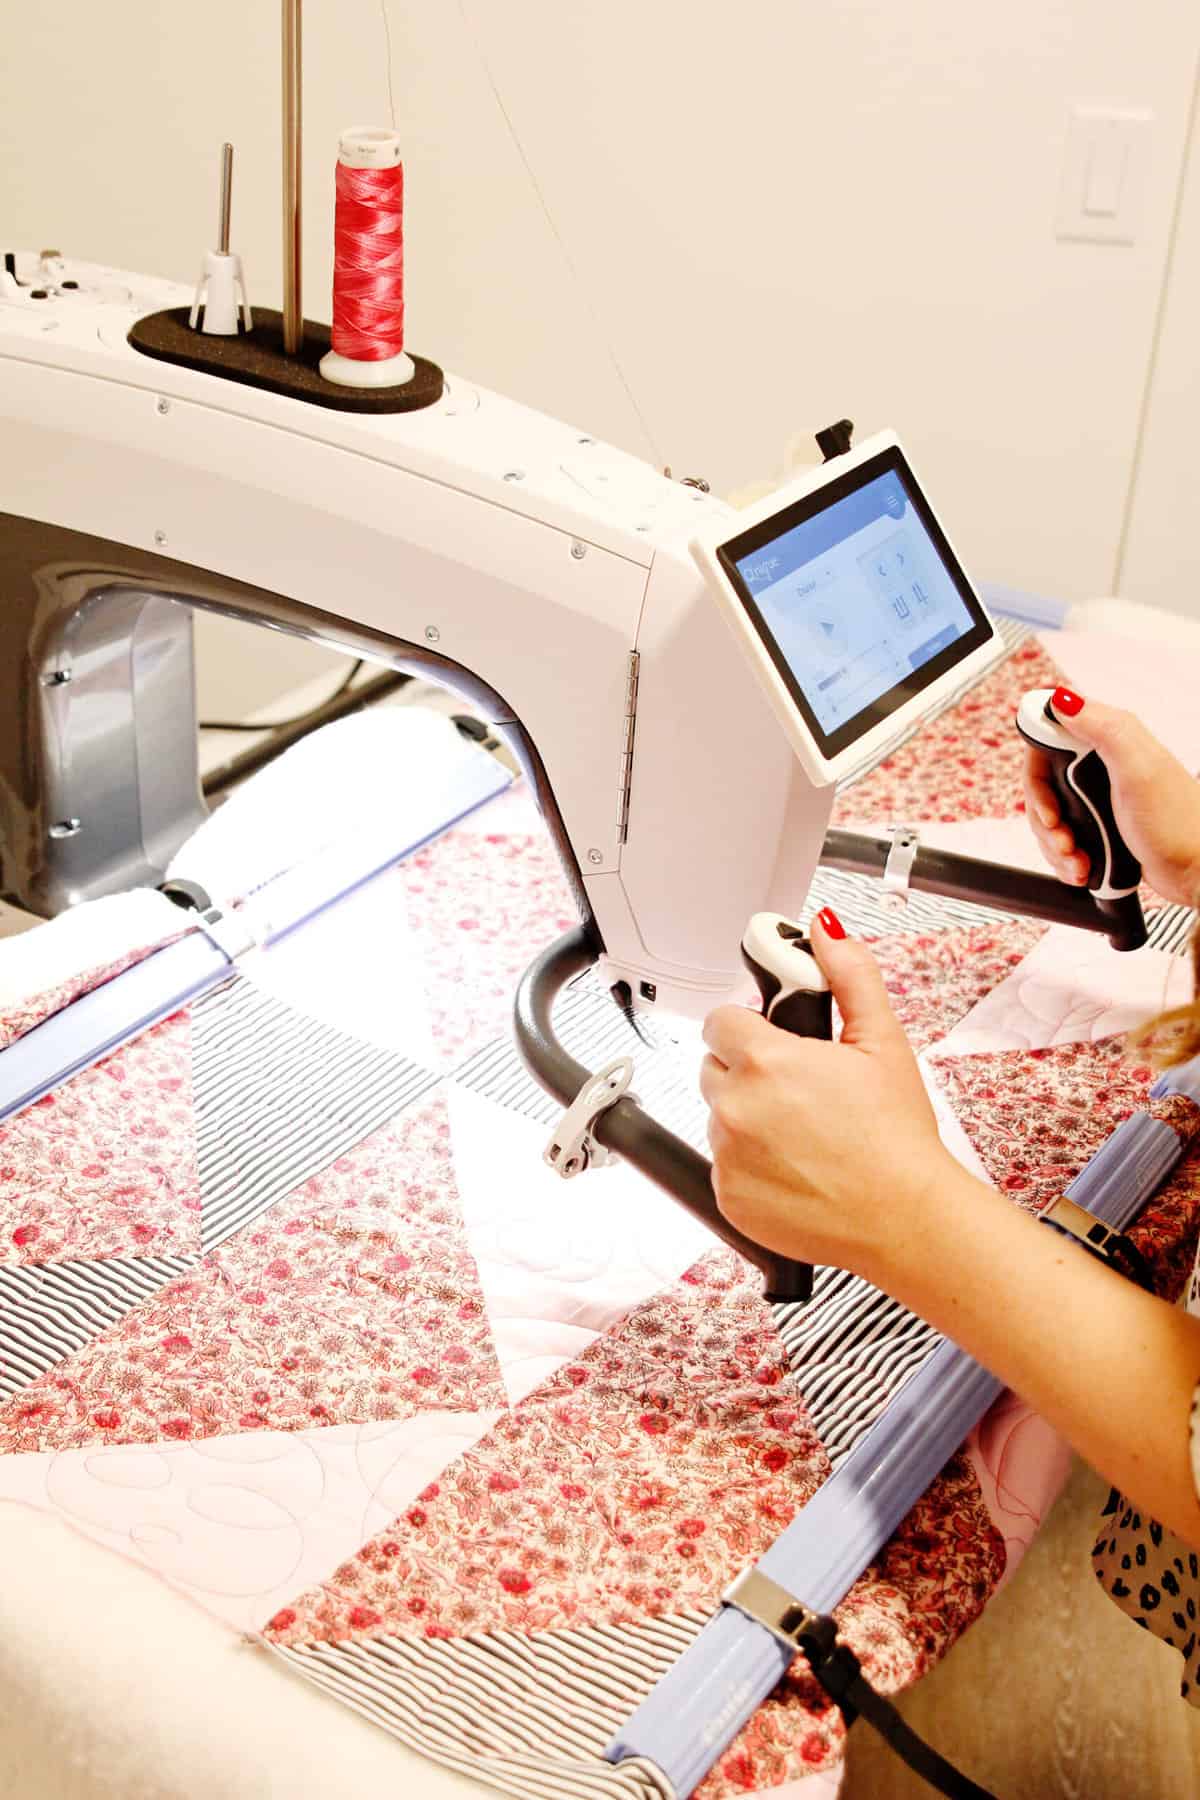 Machine Quilting on Pinterest  Free Motion Quilting, Longarm